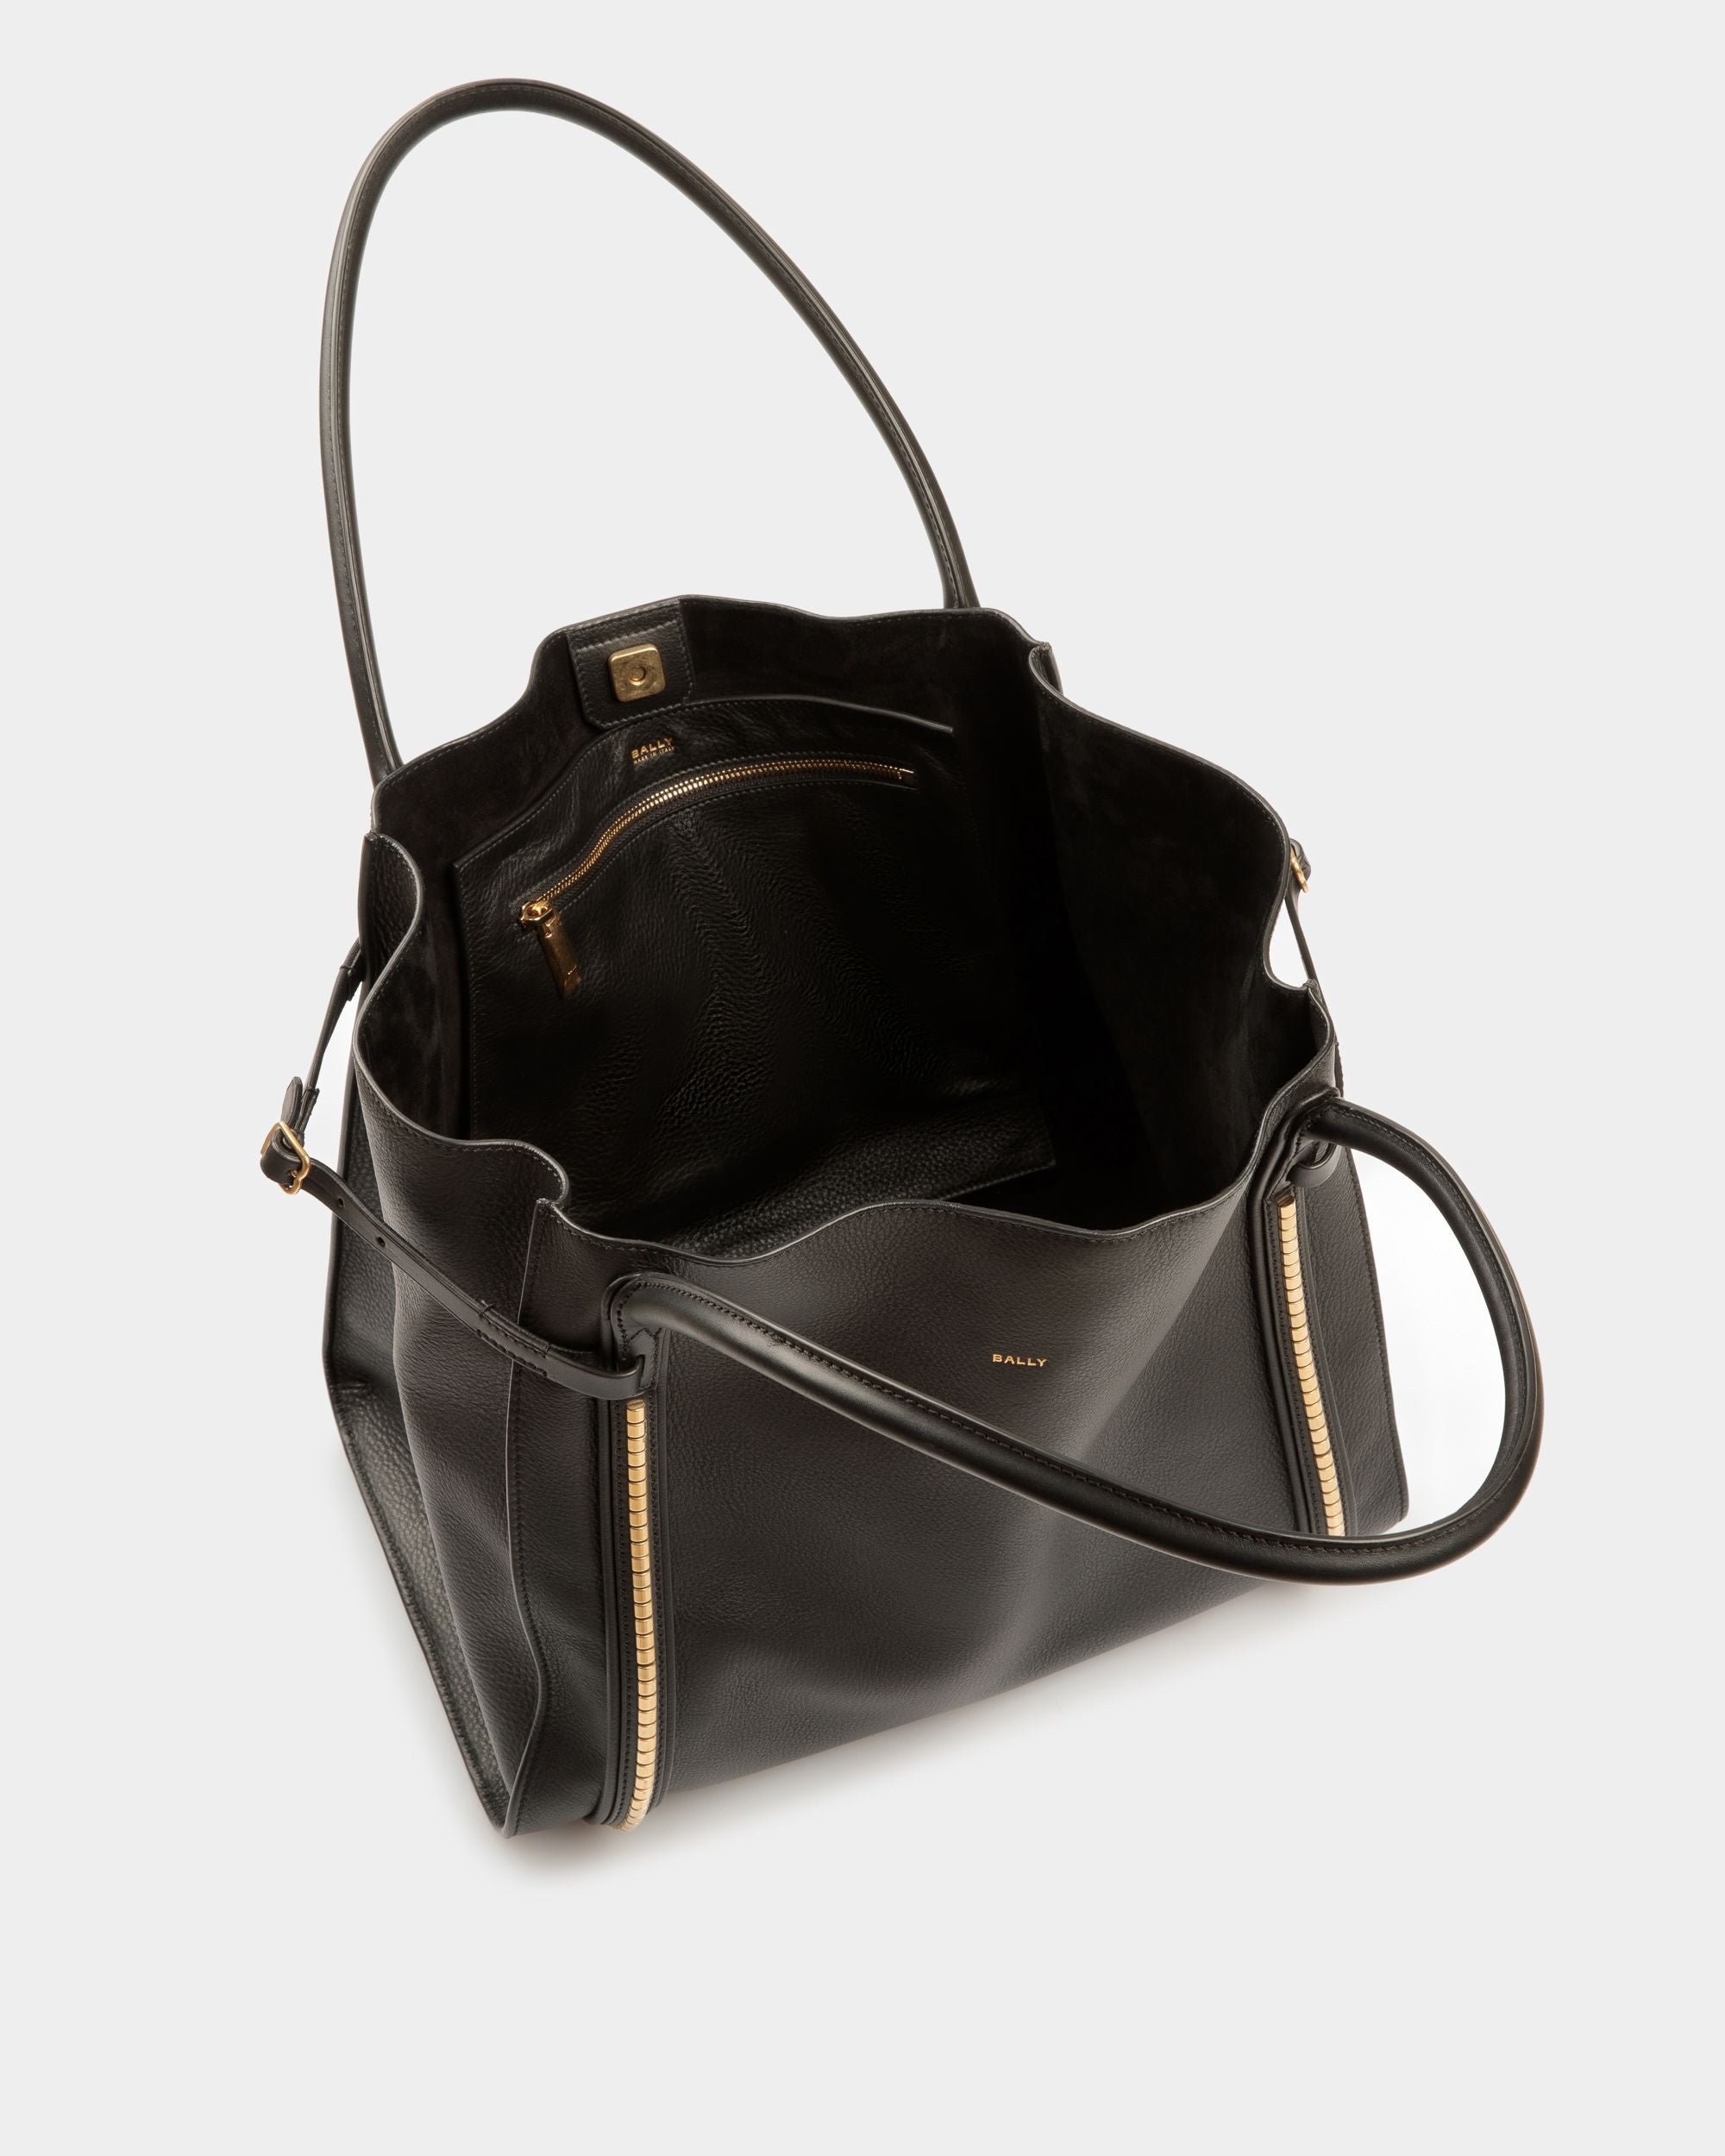 Chesney Large Tote Bag | Women's Tote | Black Leather | Bally | Still Life Open / Inside